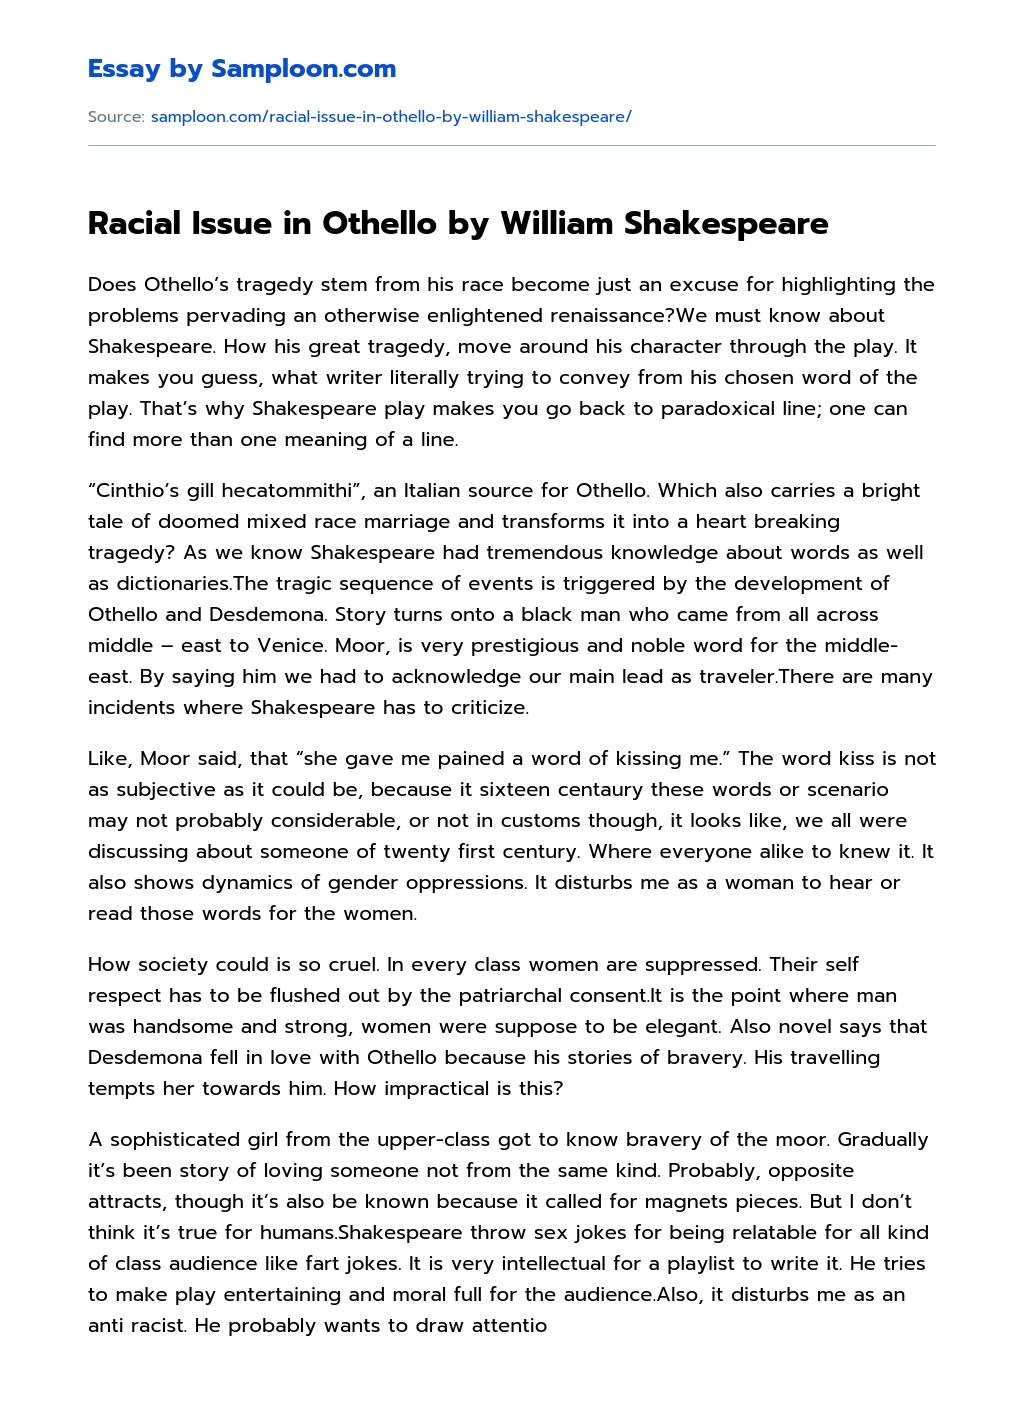 Racial Issue in Othello by William Shakespeare essay